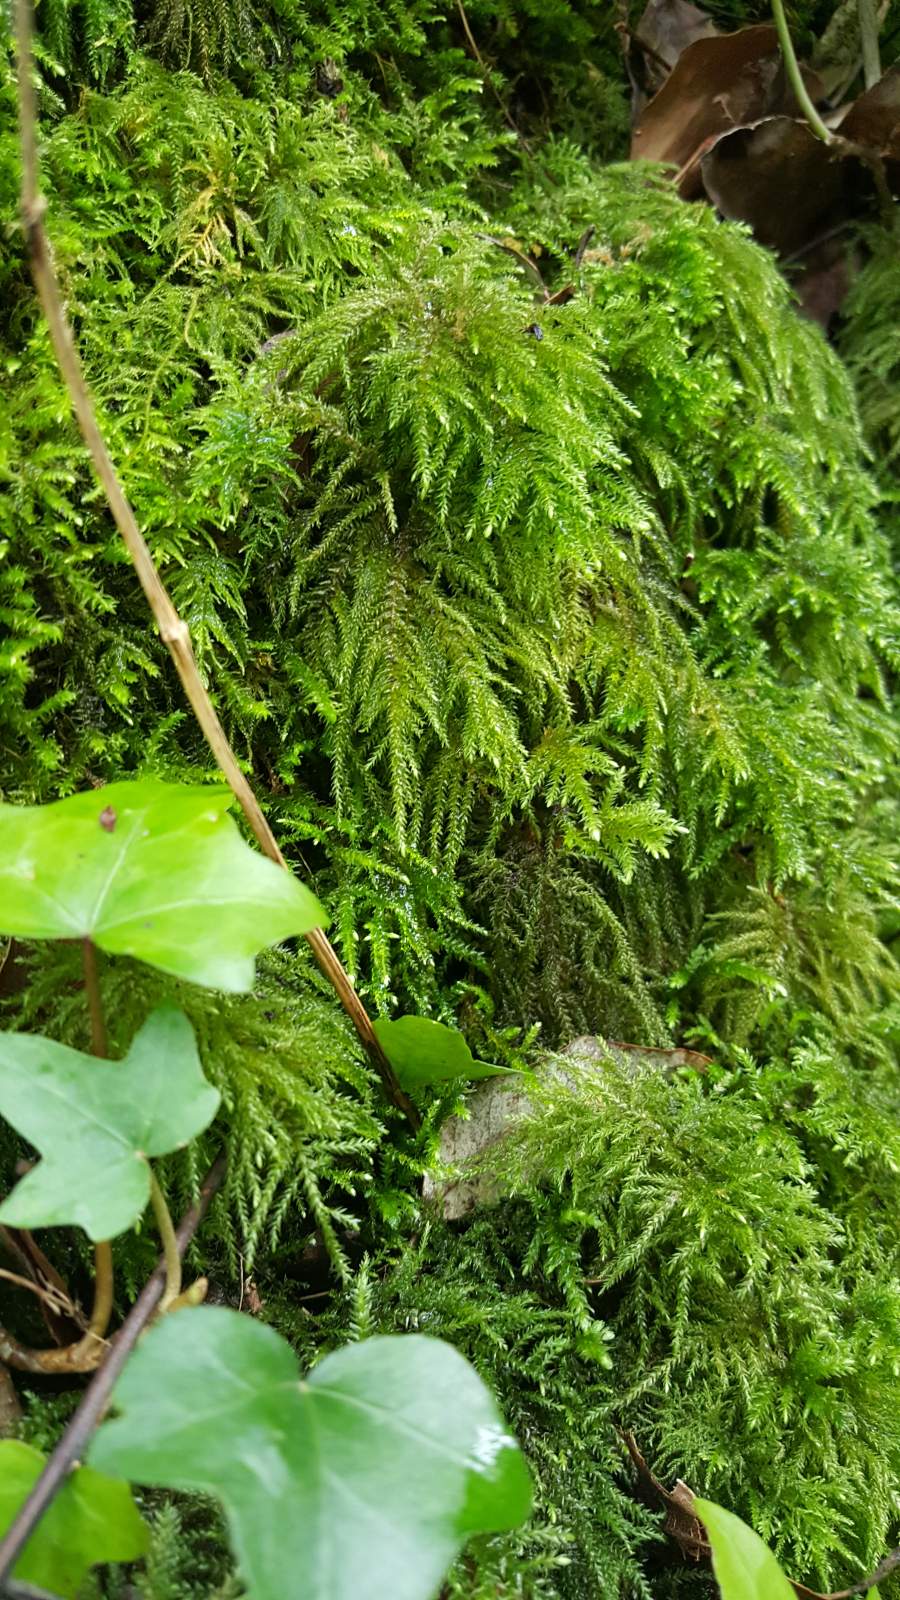 Mosses and Ivy dripping with water outside the Northern end of Shute Shelve Tunnel